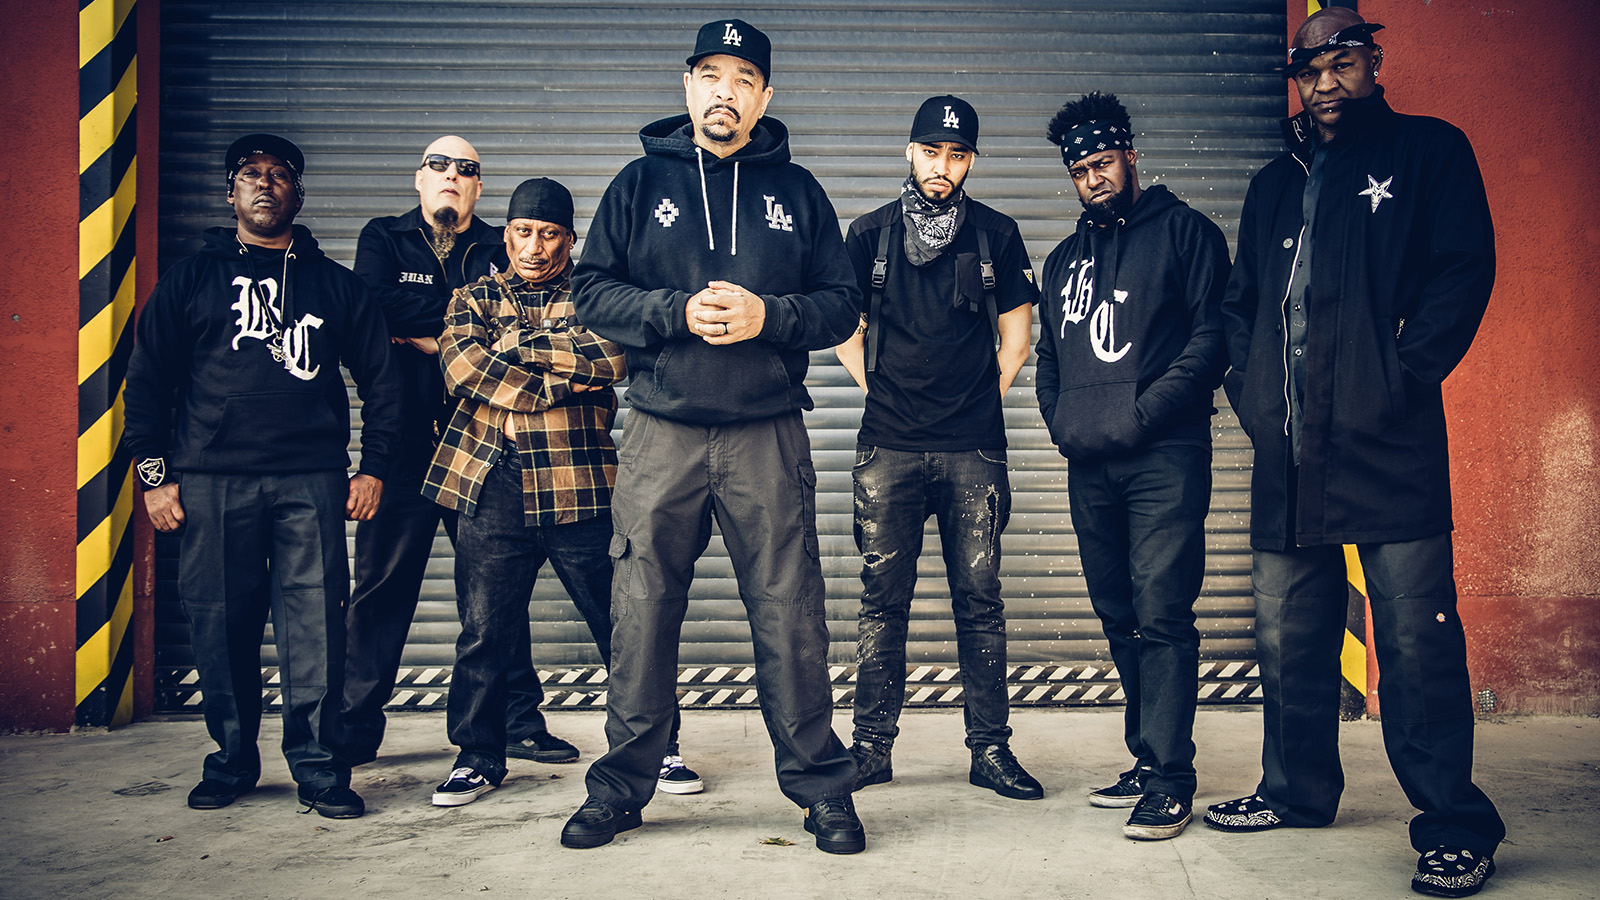 Hear Ice T's Metal Band Body Count Throw Down On New Song Carnivore